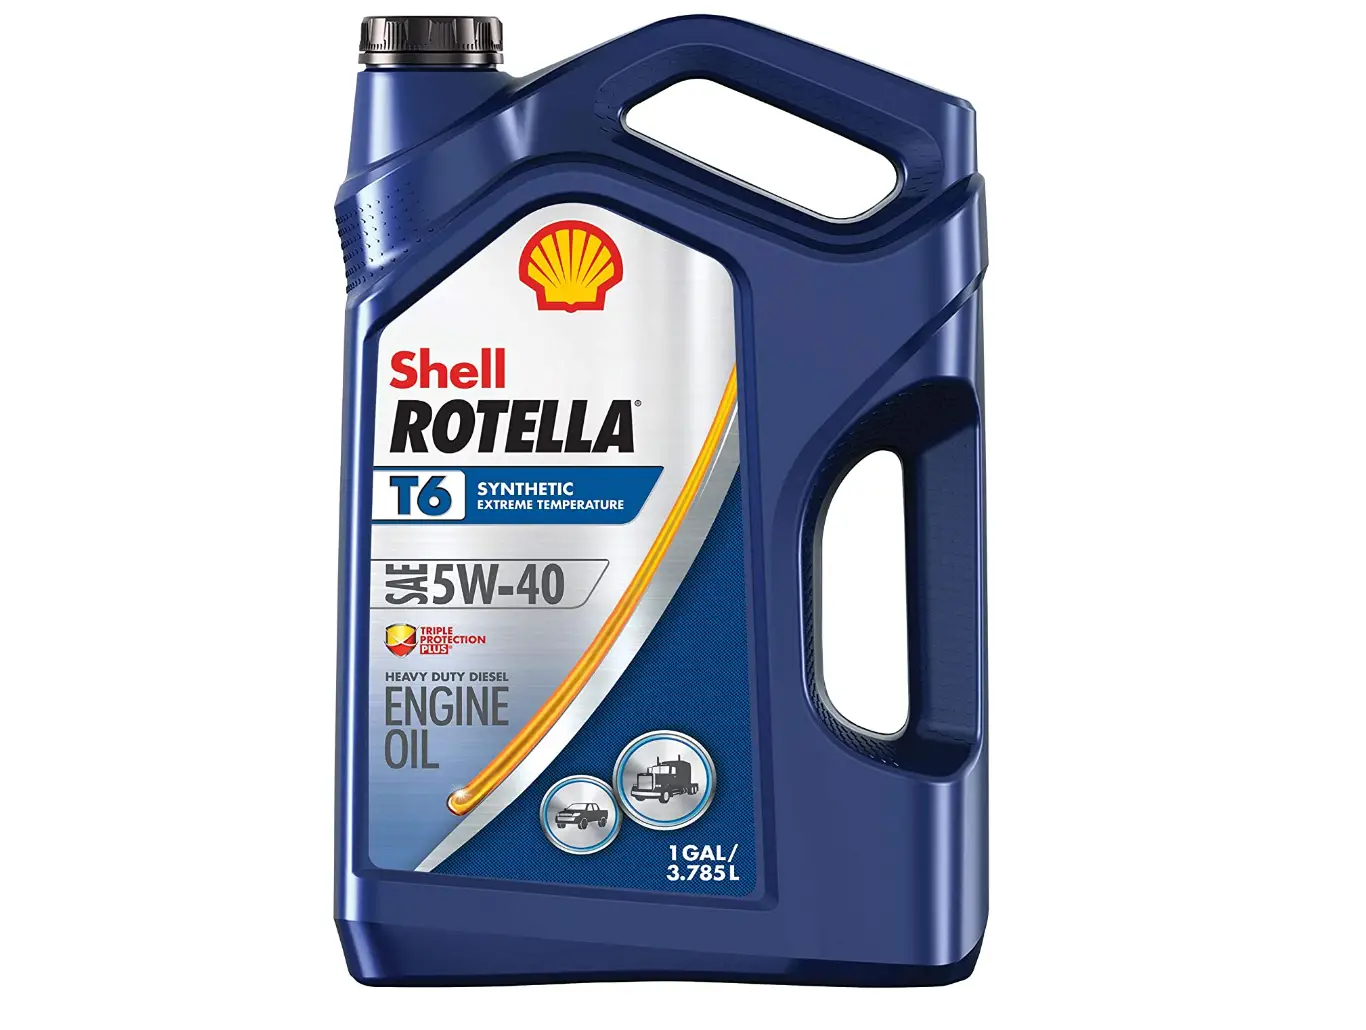 Shell Rotella T6 Full Synthetic Diesel Engine Oil